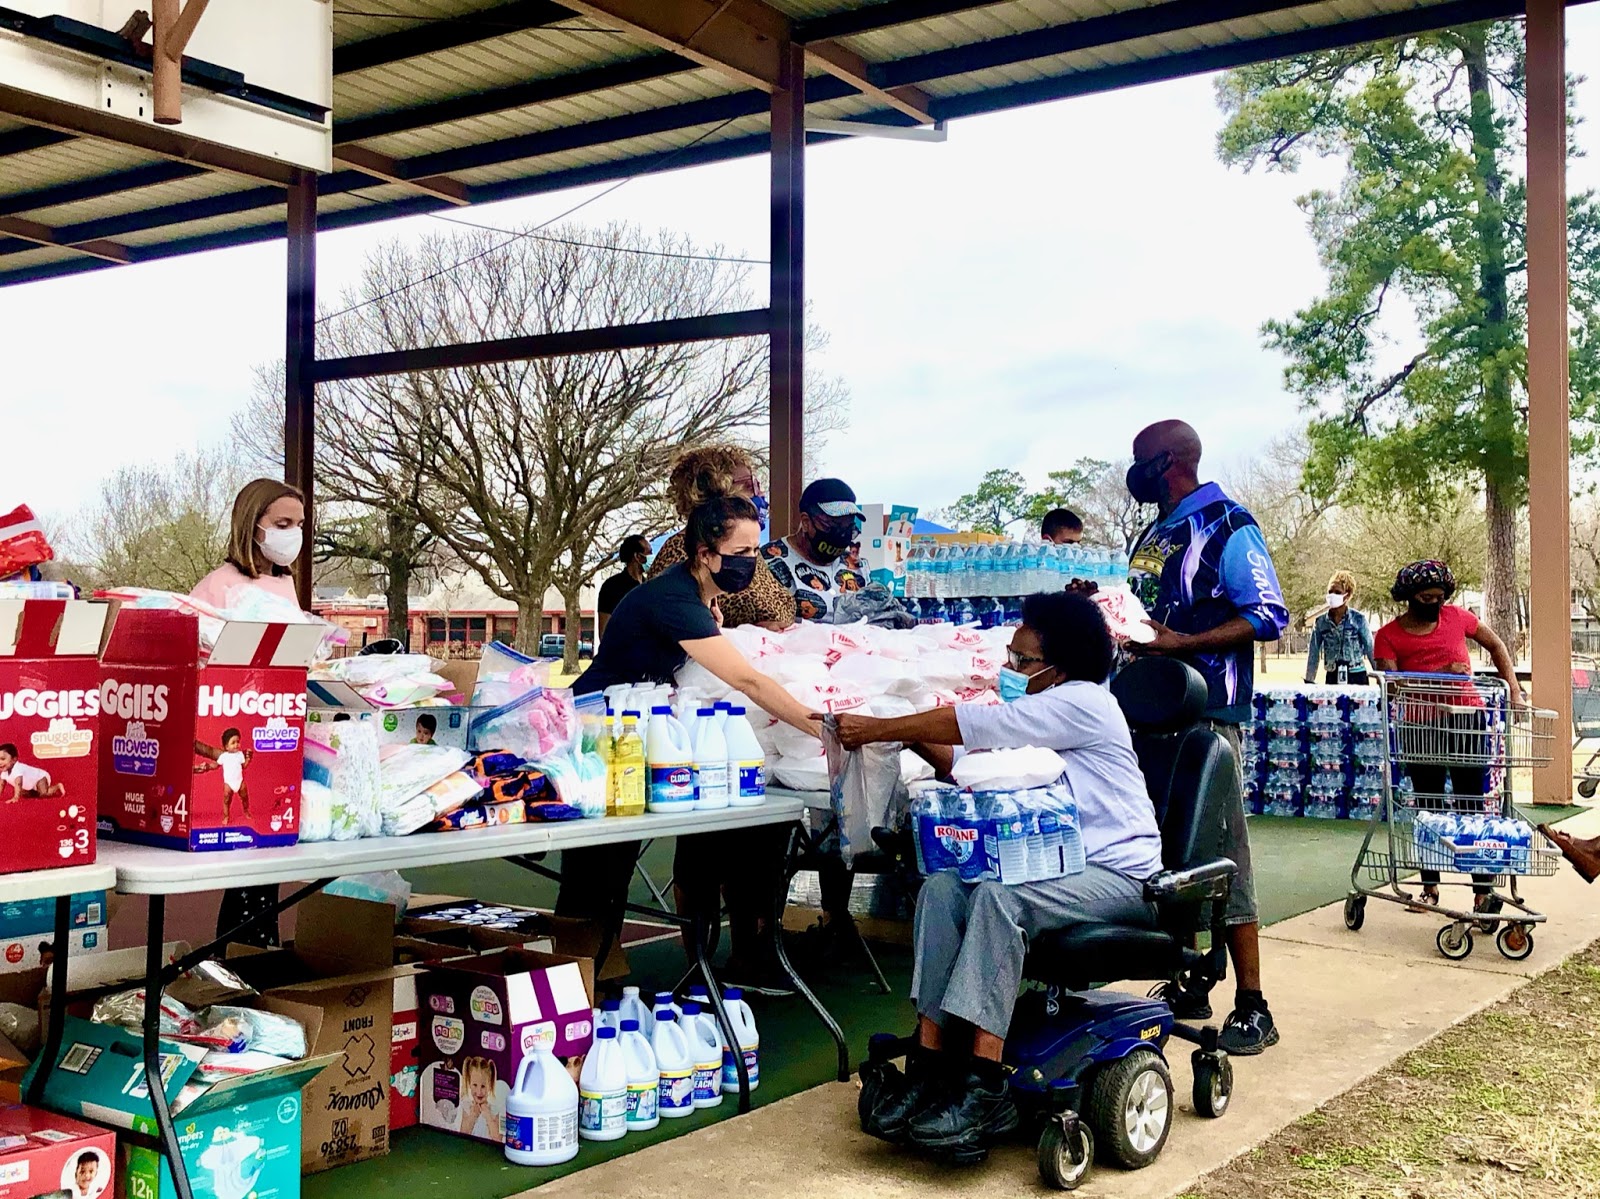 Fifth Ward organizers aid the community in the winter storm relief efforts. | Courtesy image